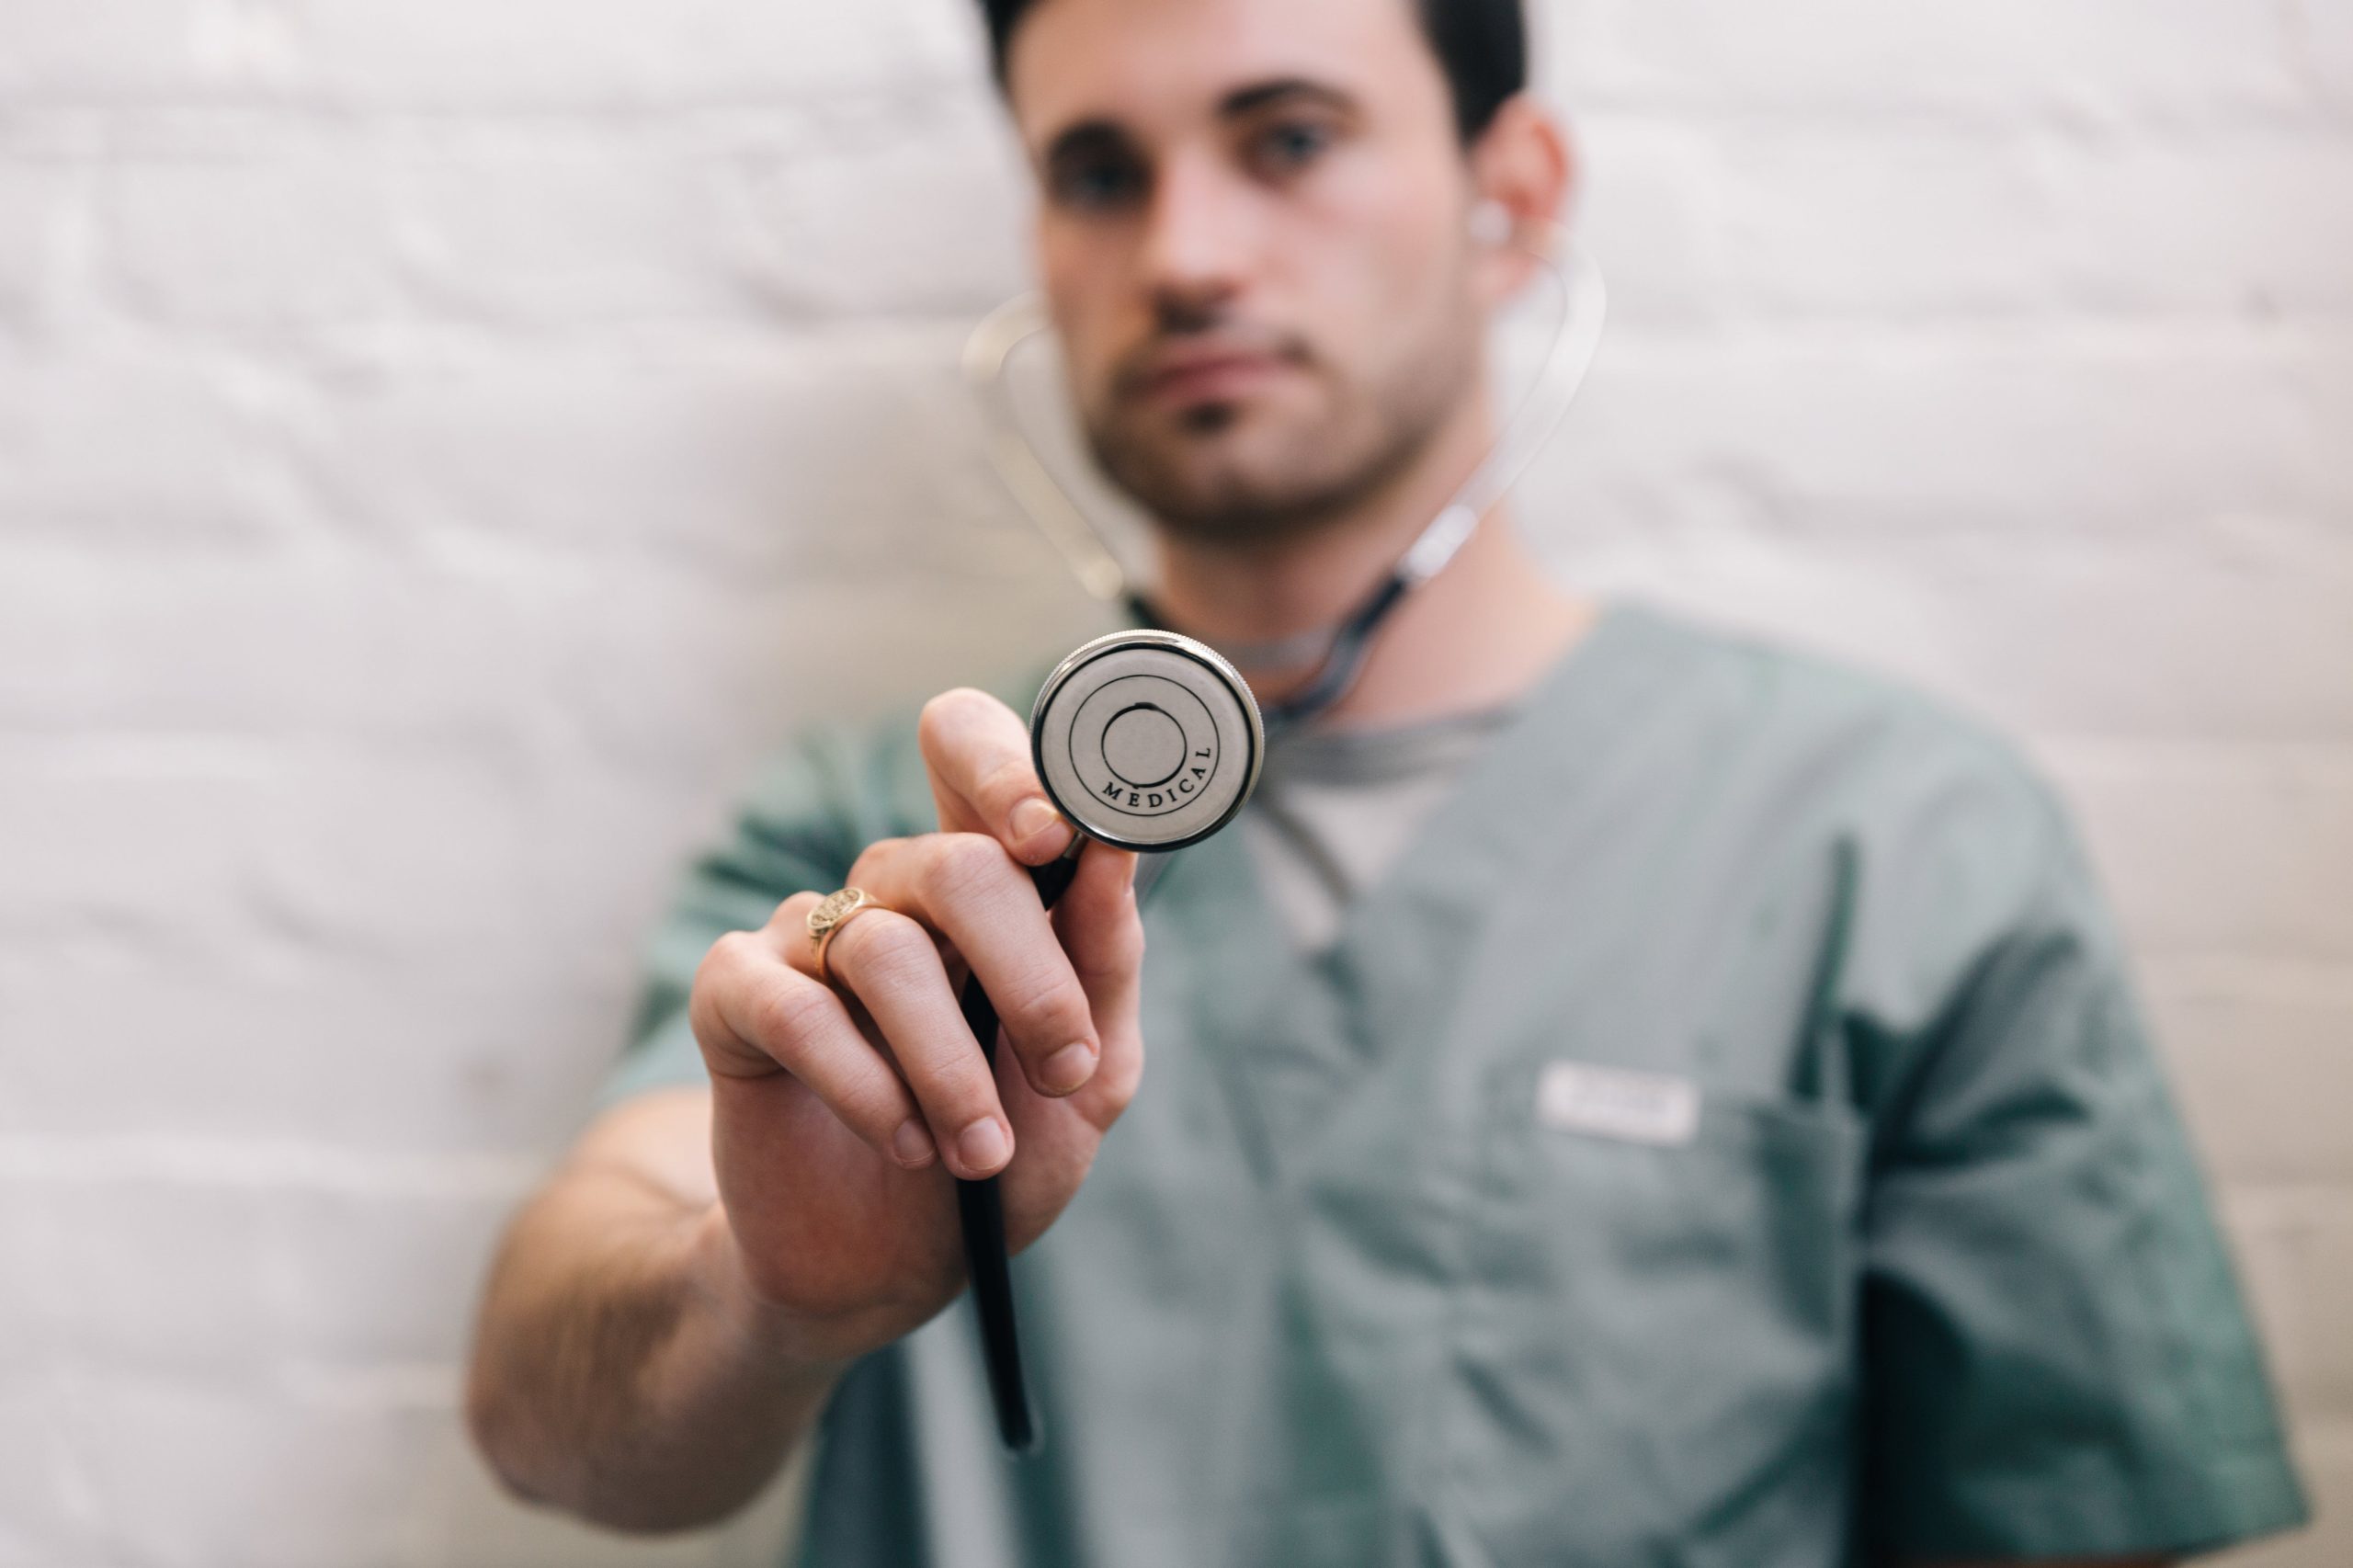 male doctor holding out stethoscope scaled